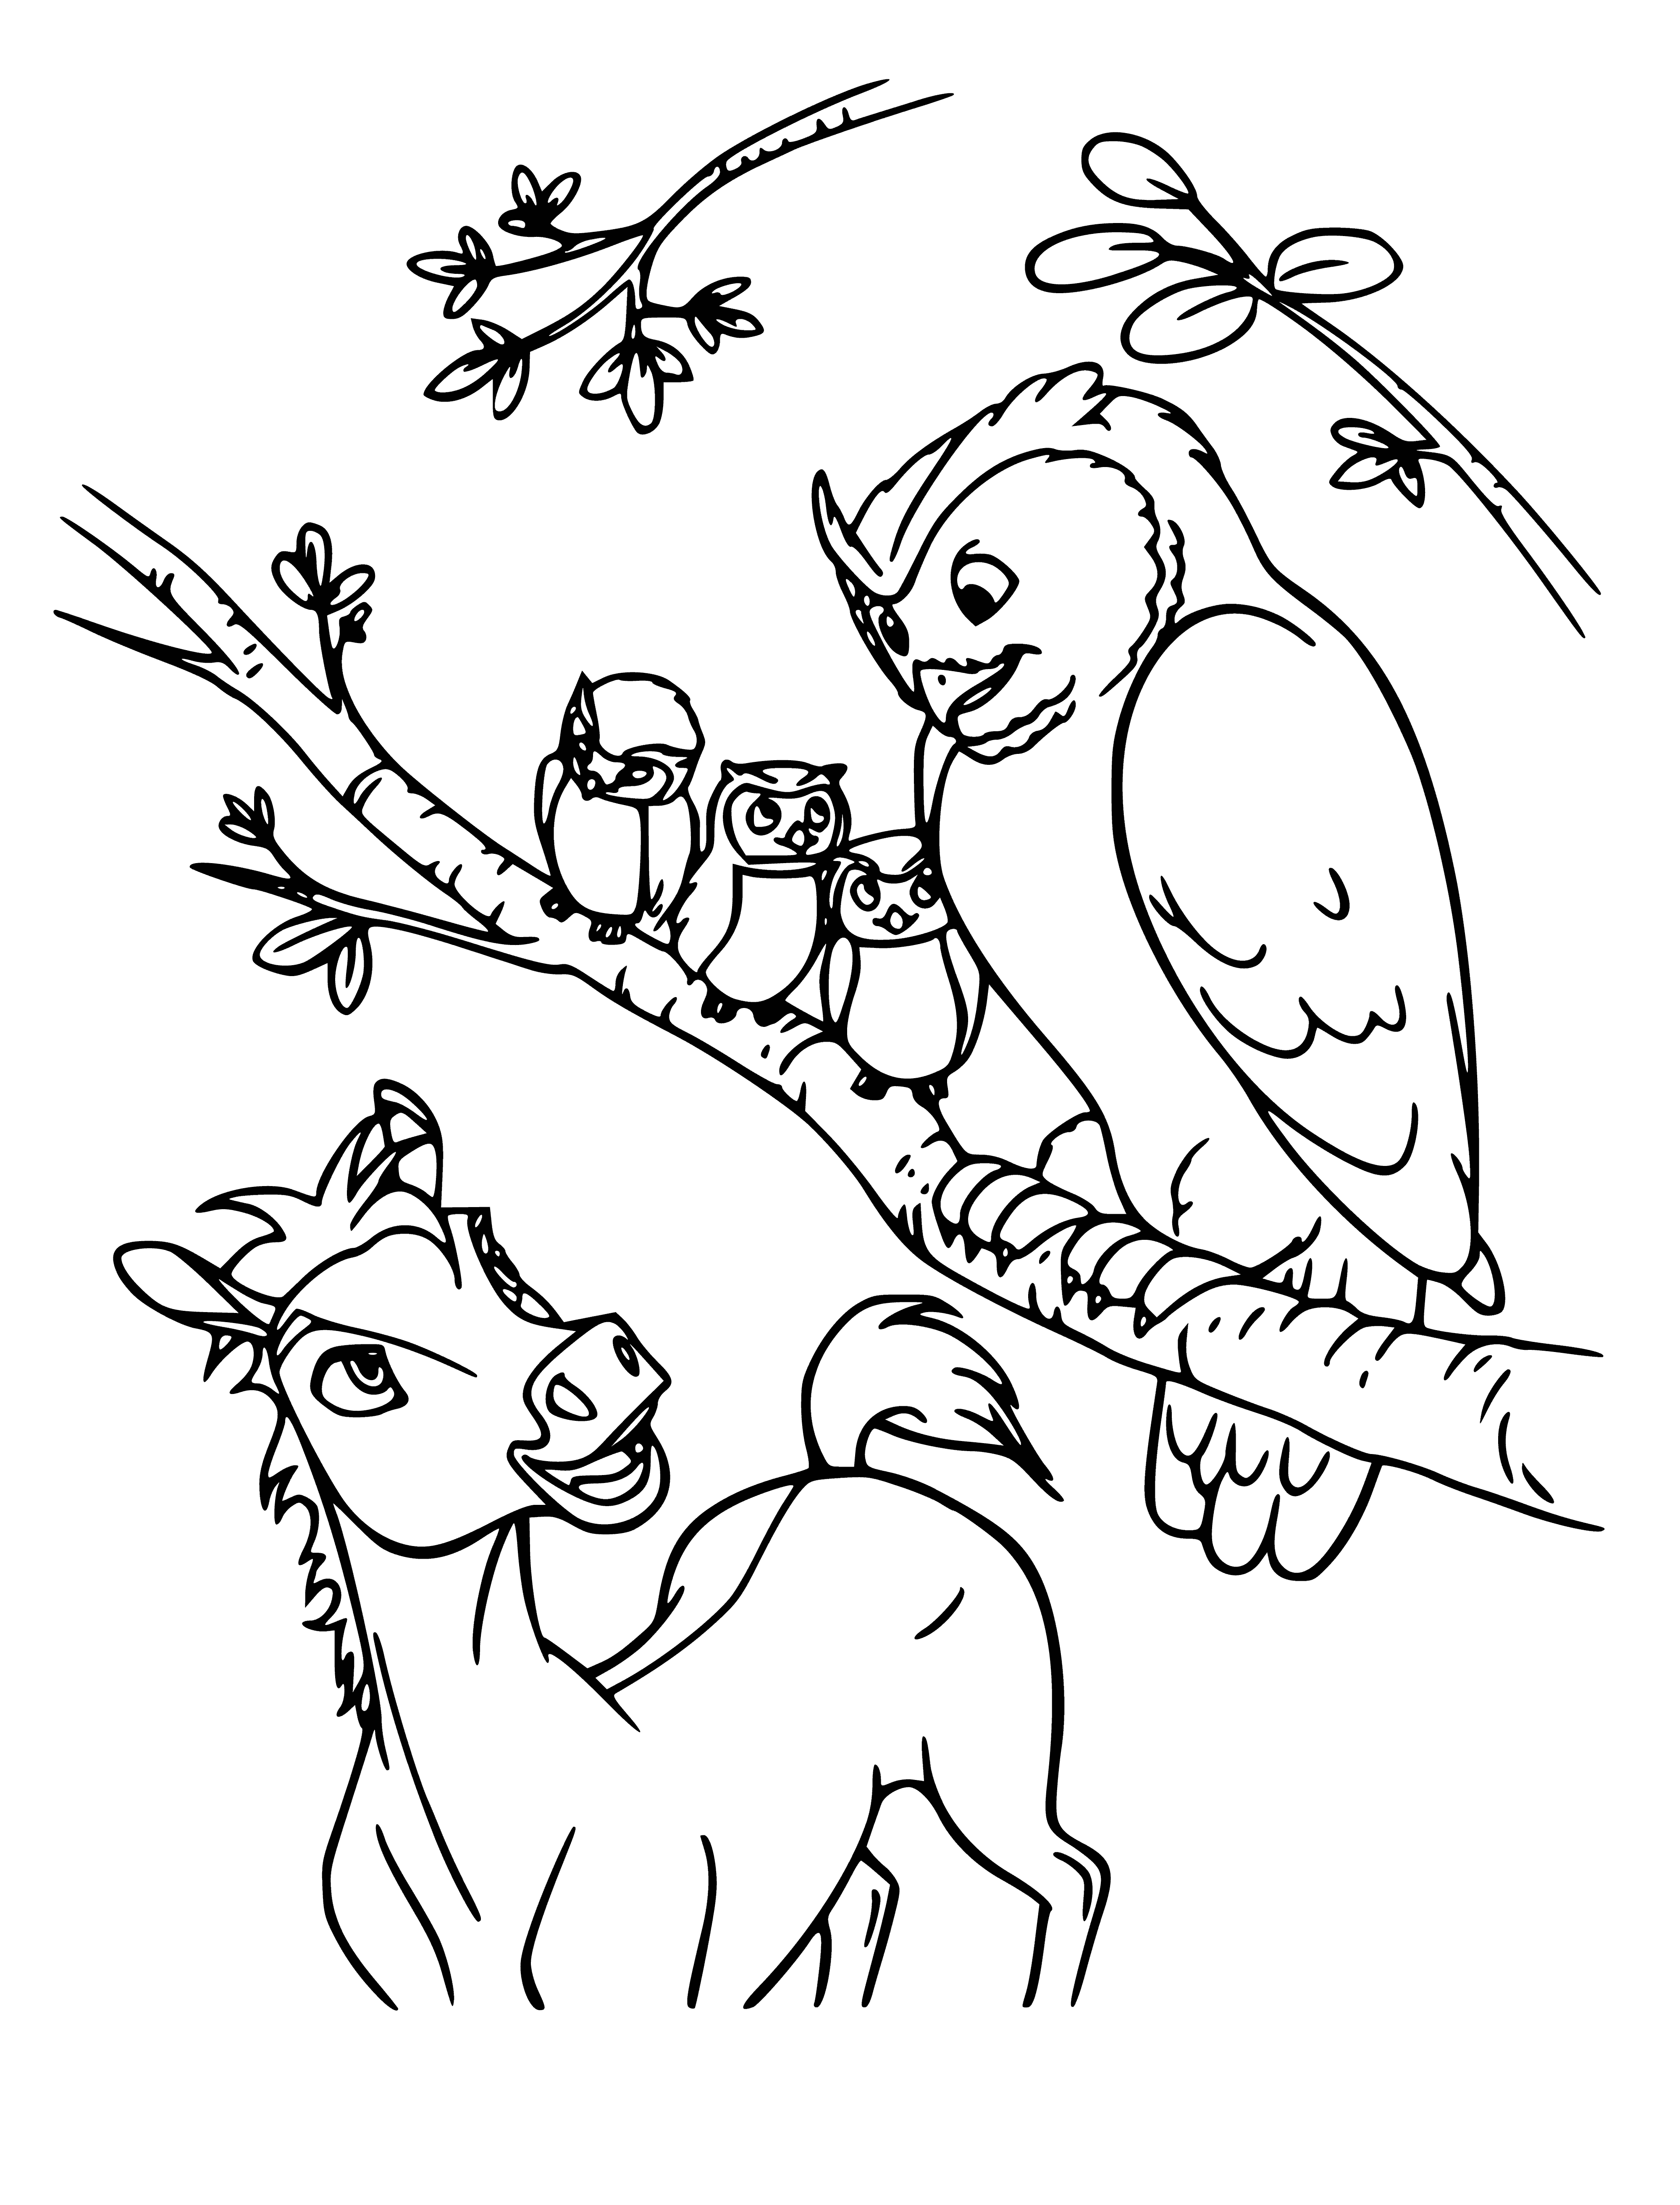 coloring page: Friends of Spirit are a supportive group of people of various ages and backgrounds united in their love for and belief in Spirit's abilities and dreams. They will be by his side encouraging him every step of his journey.